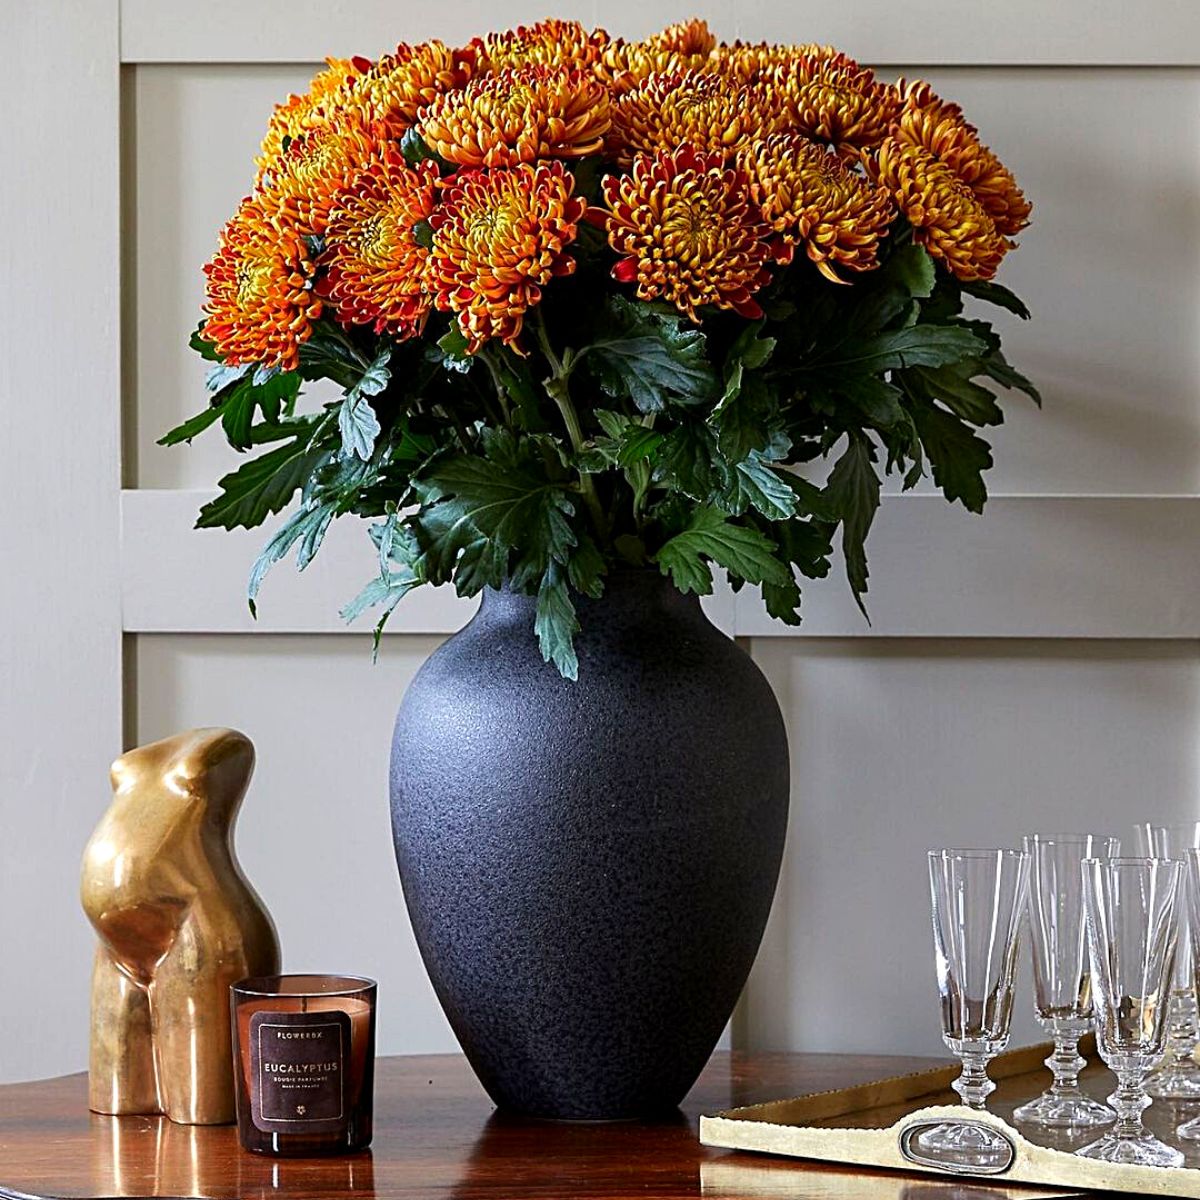 Incorporating Chrysanthemums in Autumn Floral Compositions